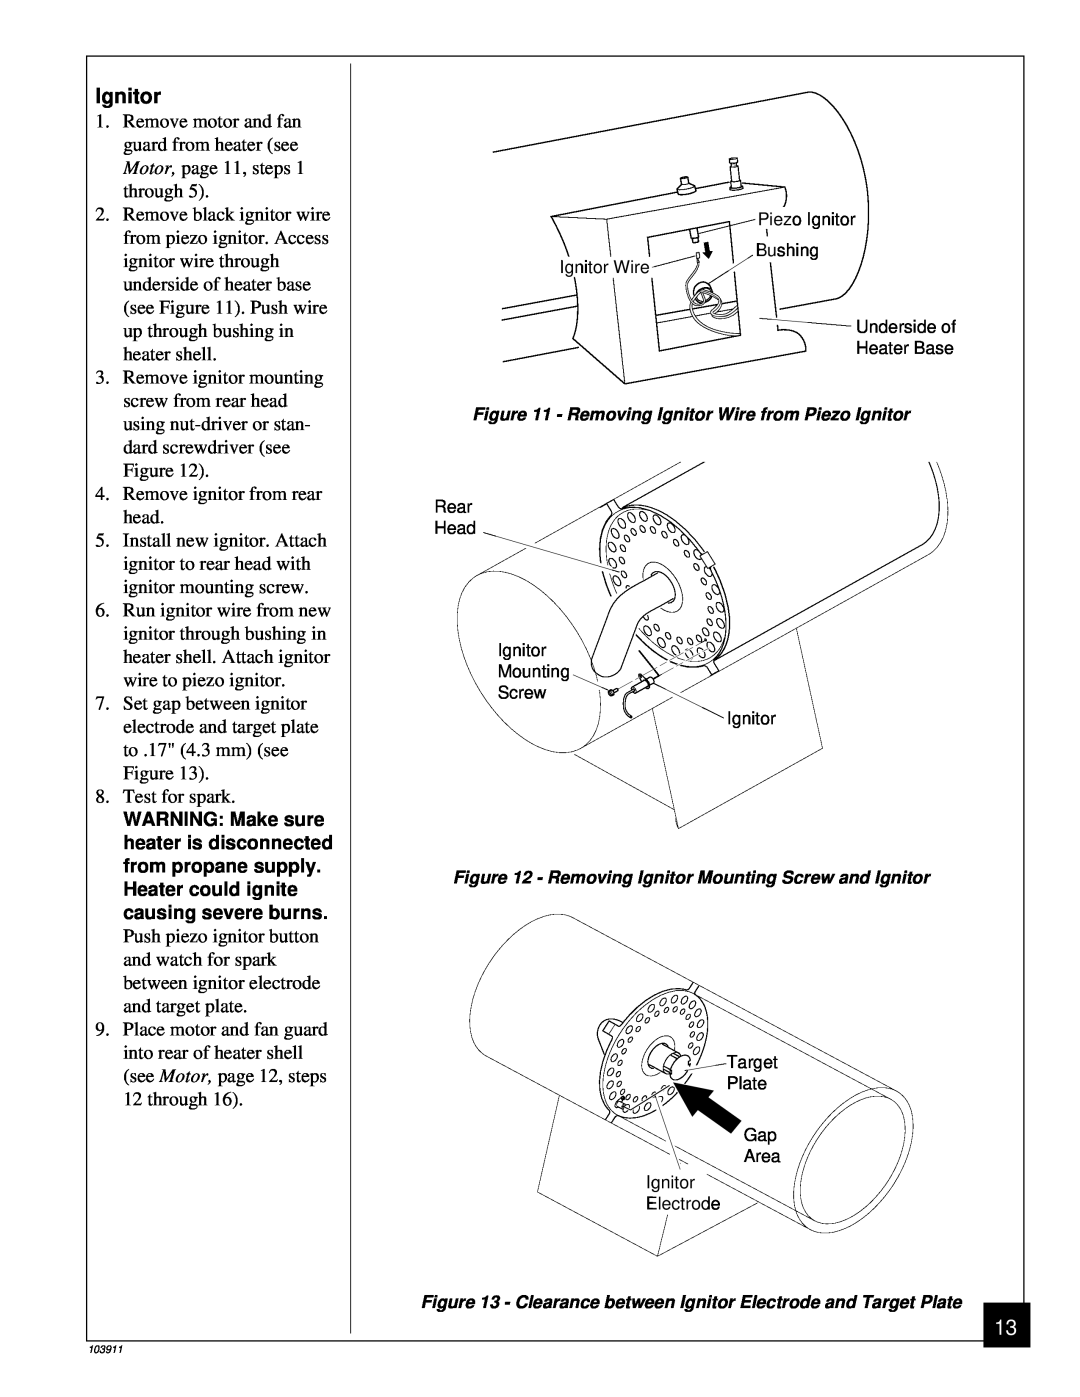 Desa RCLP50B owner manual Ignitor, WARNING Make sure, from propane supply, Heater could ignite, causing severe burns 